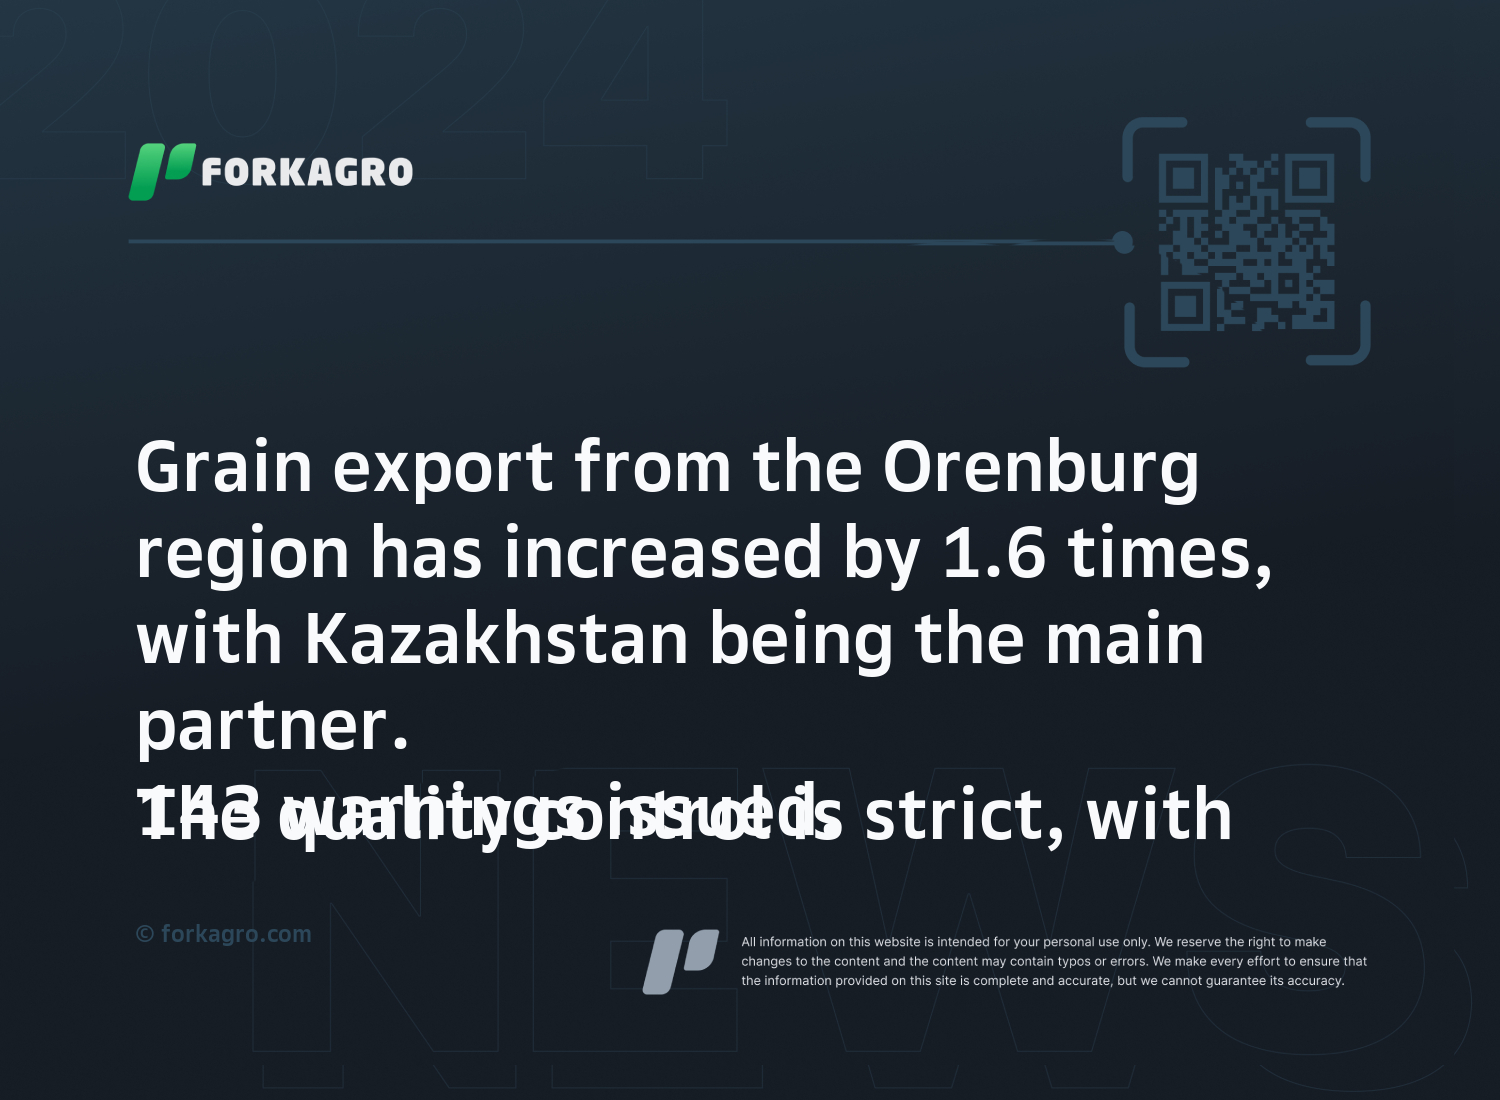 Grain export from the Orenburg region has increased by 1.6 times, with Kazakhstan being the main partner.
The quality control is strict, with 143 warnings issued.